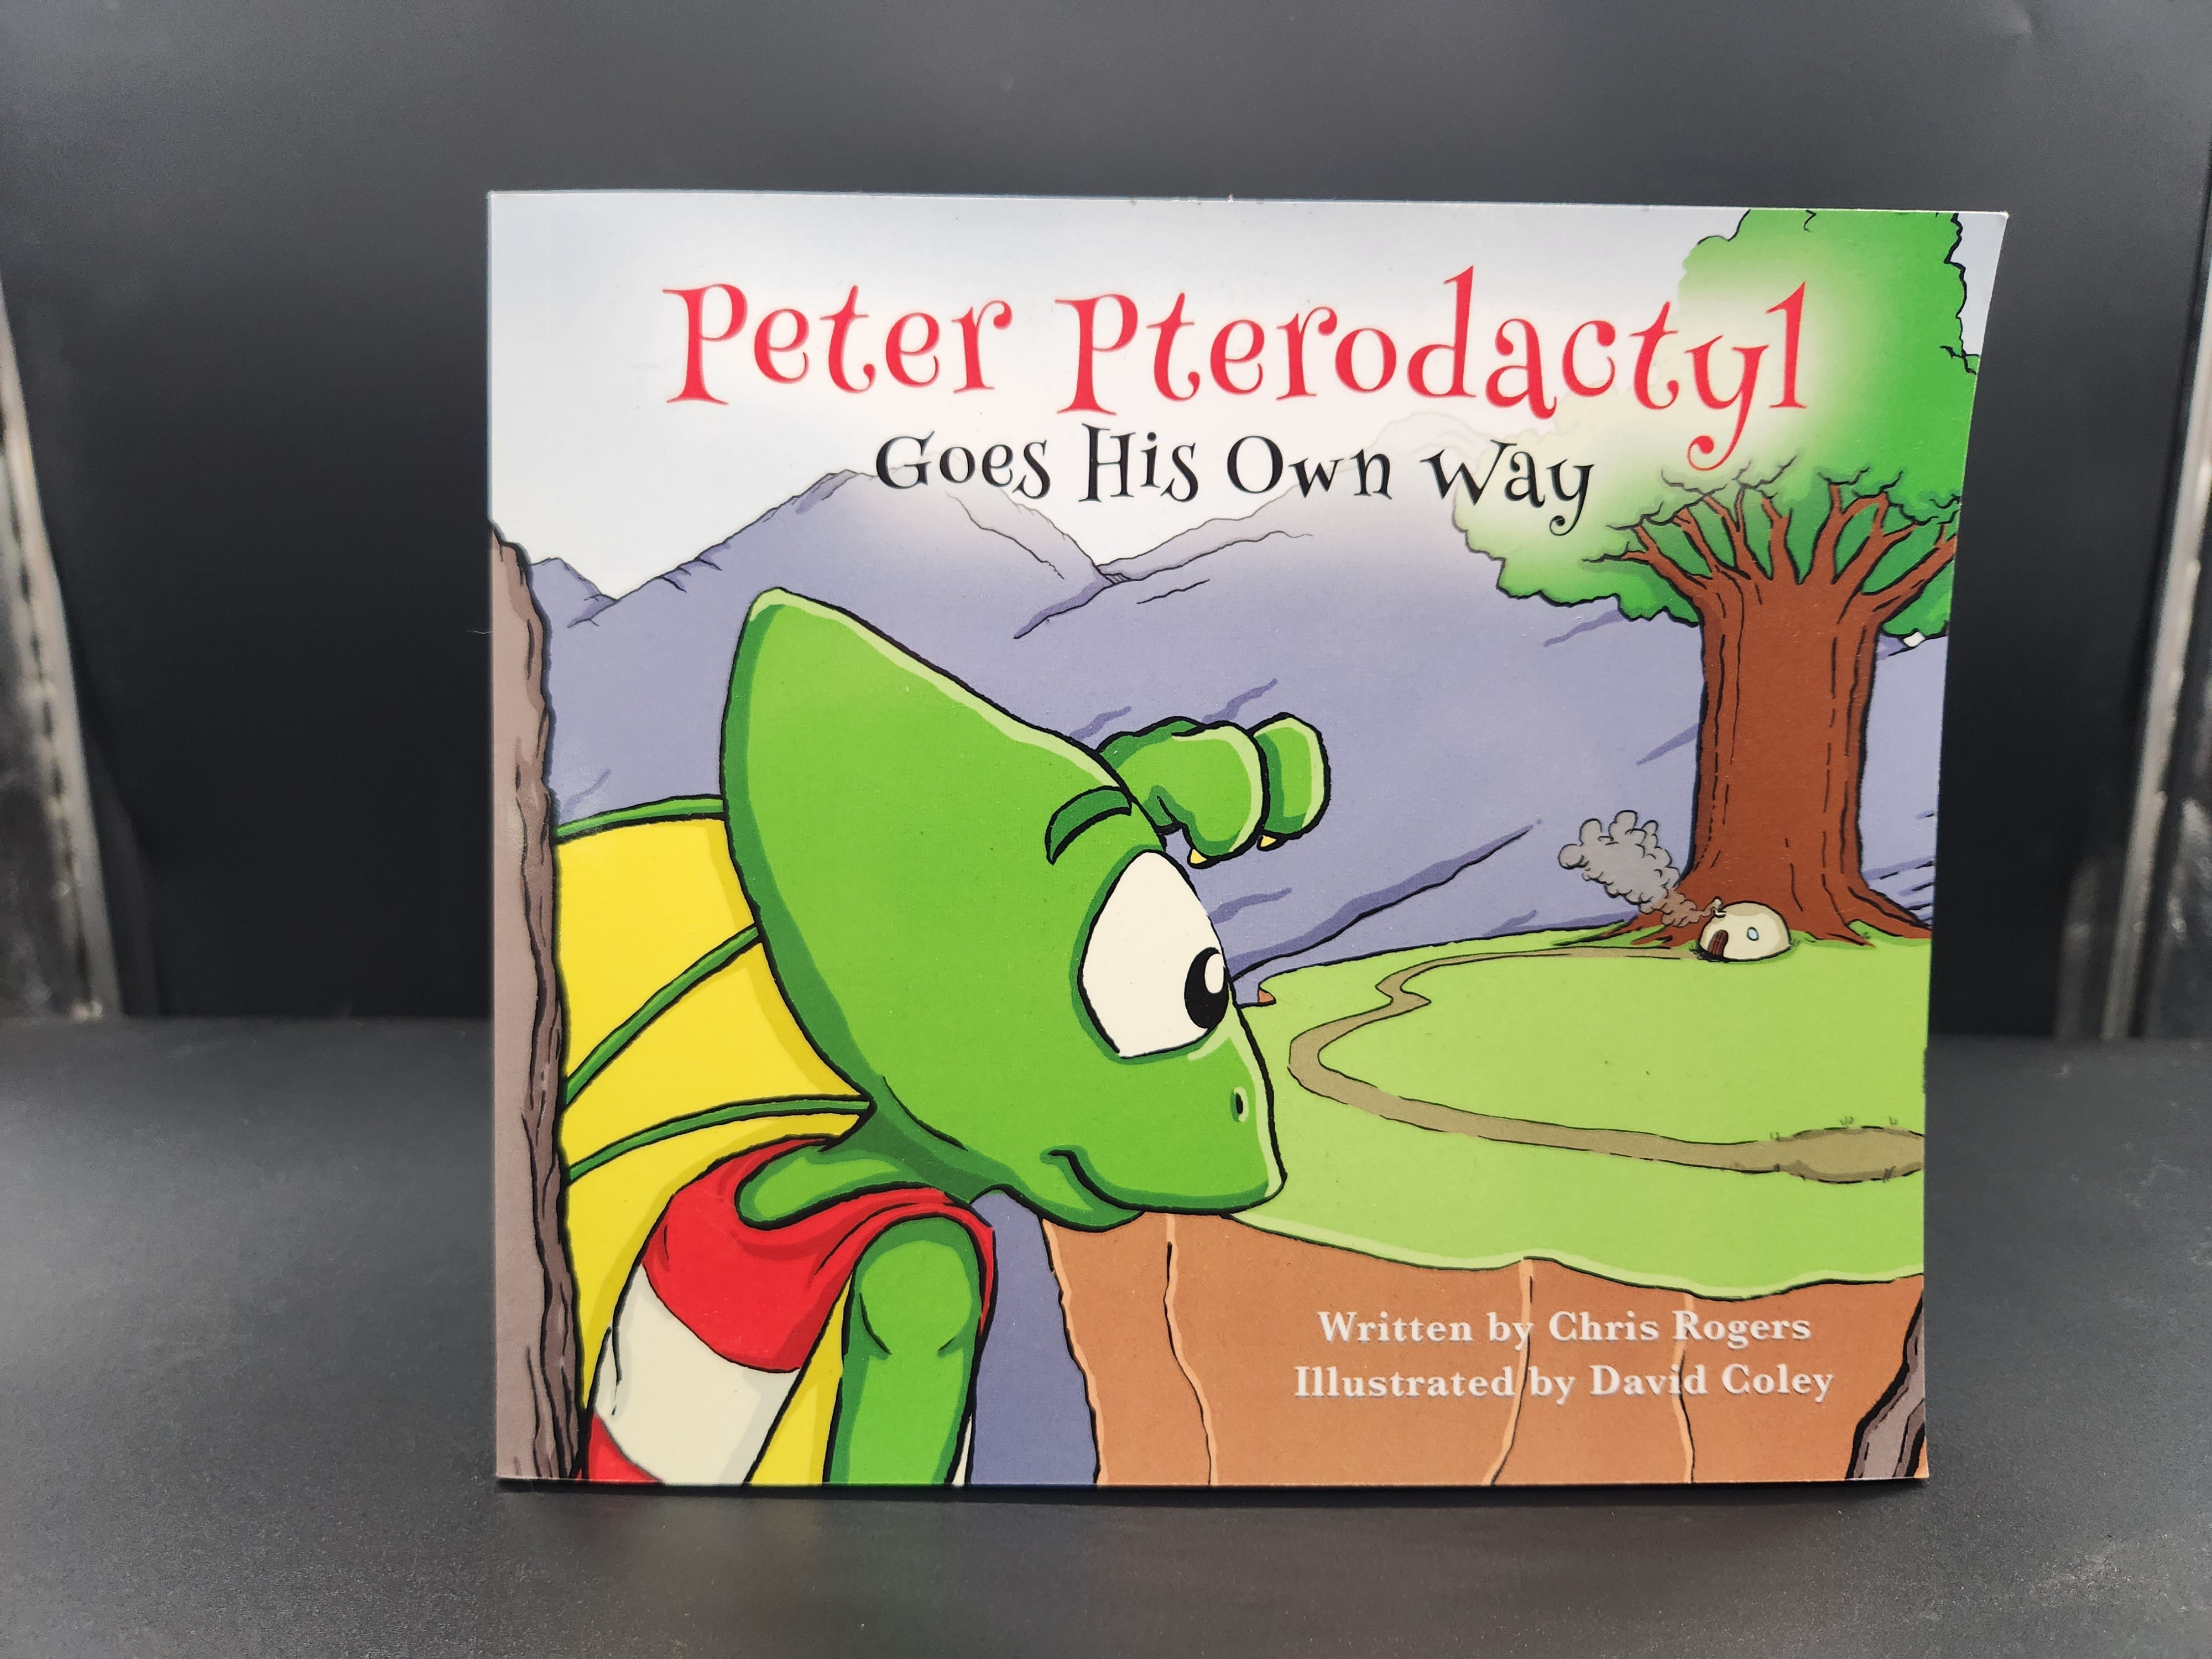 Peter Pterodactyl Goes His Own Way